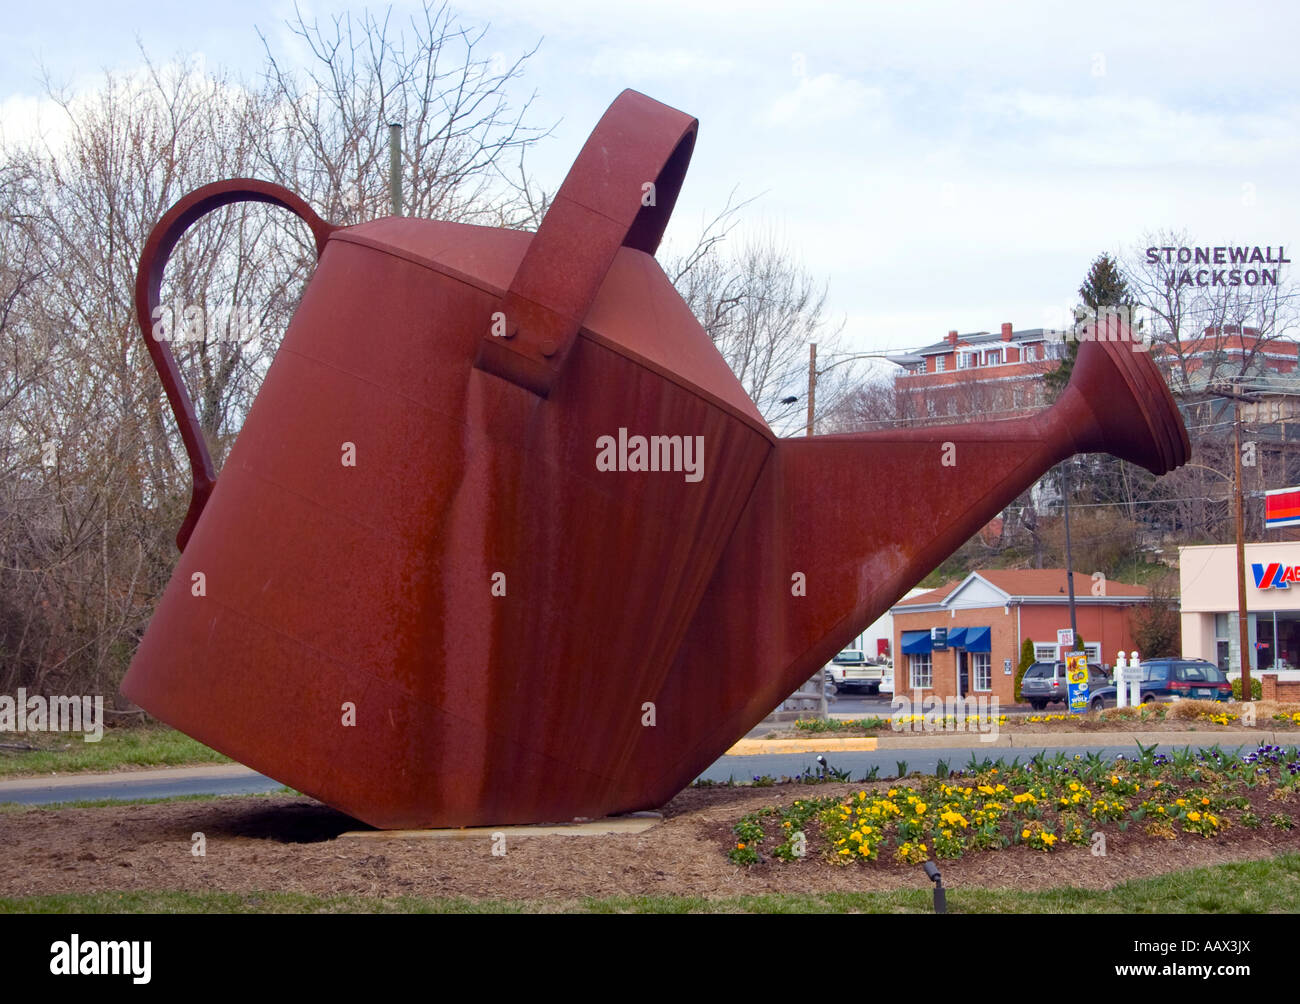 Giant Watering Can at an intersection in Staunton Virginia Stock Photo